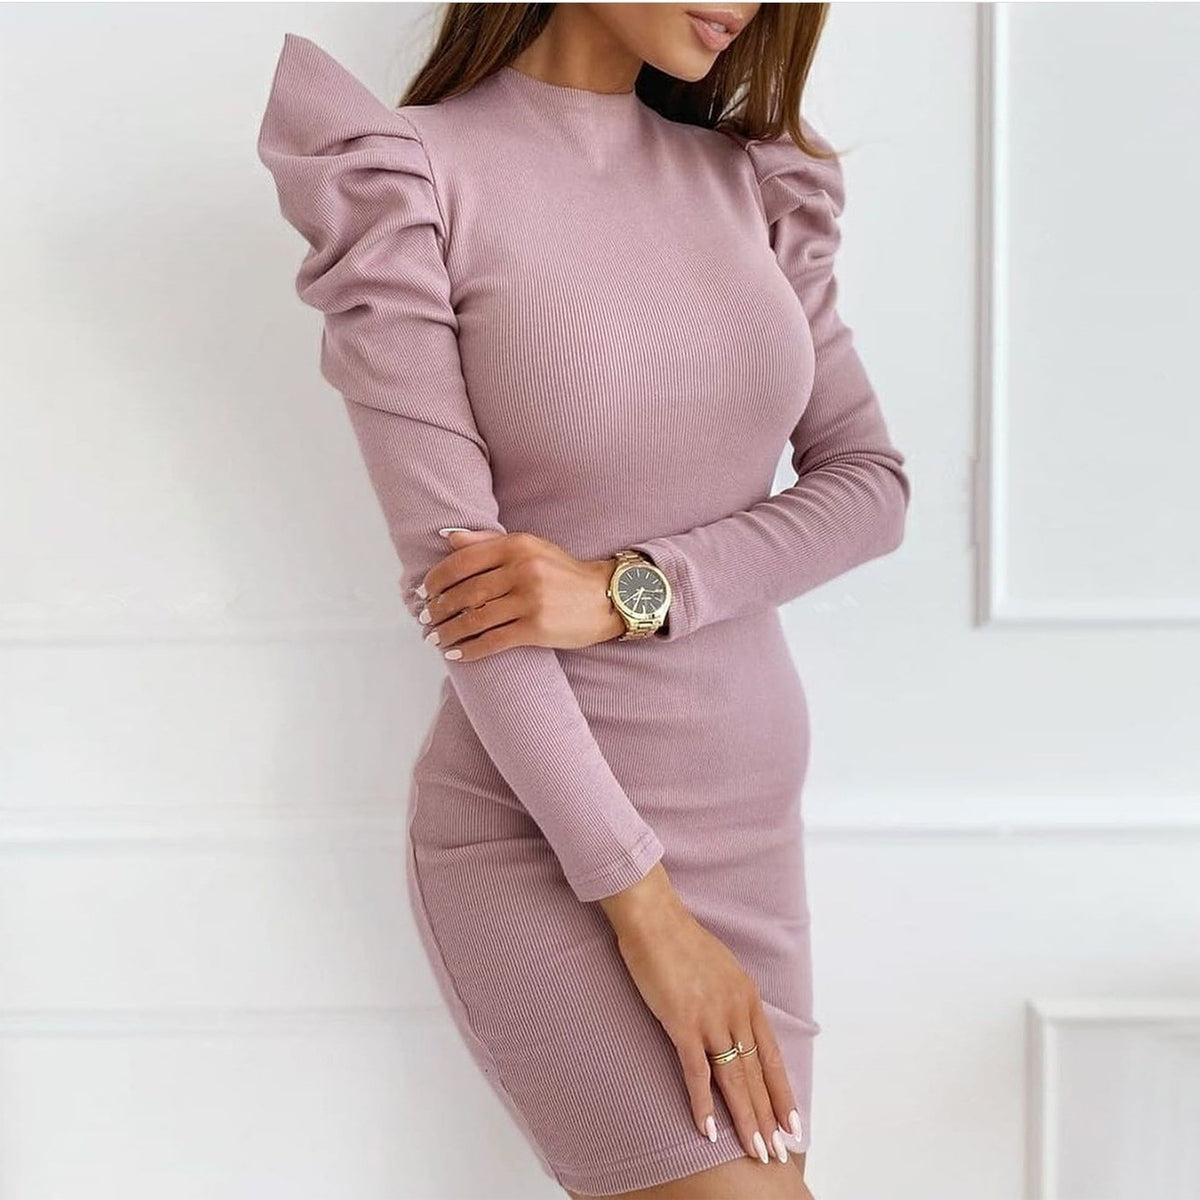 Autumn And Winter Hot-sale Women Clothing Round Neck Puff Sleeve Solid Color Slim Sexy Dress